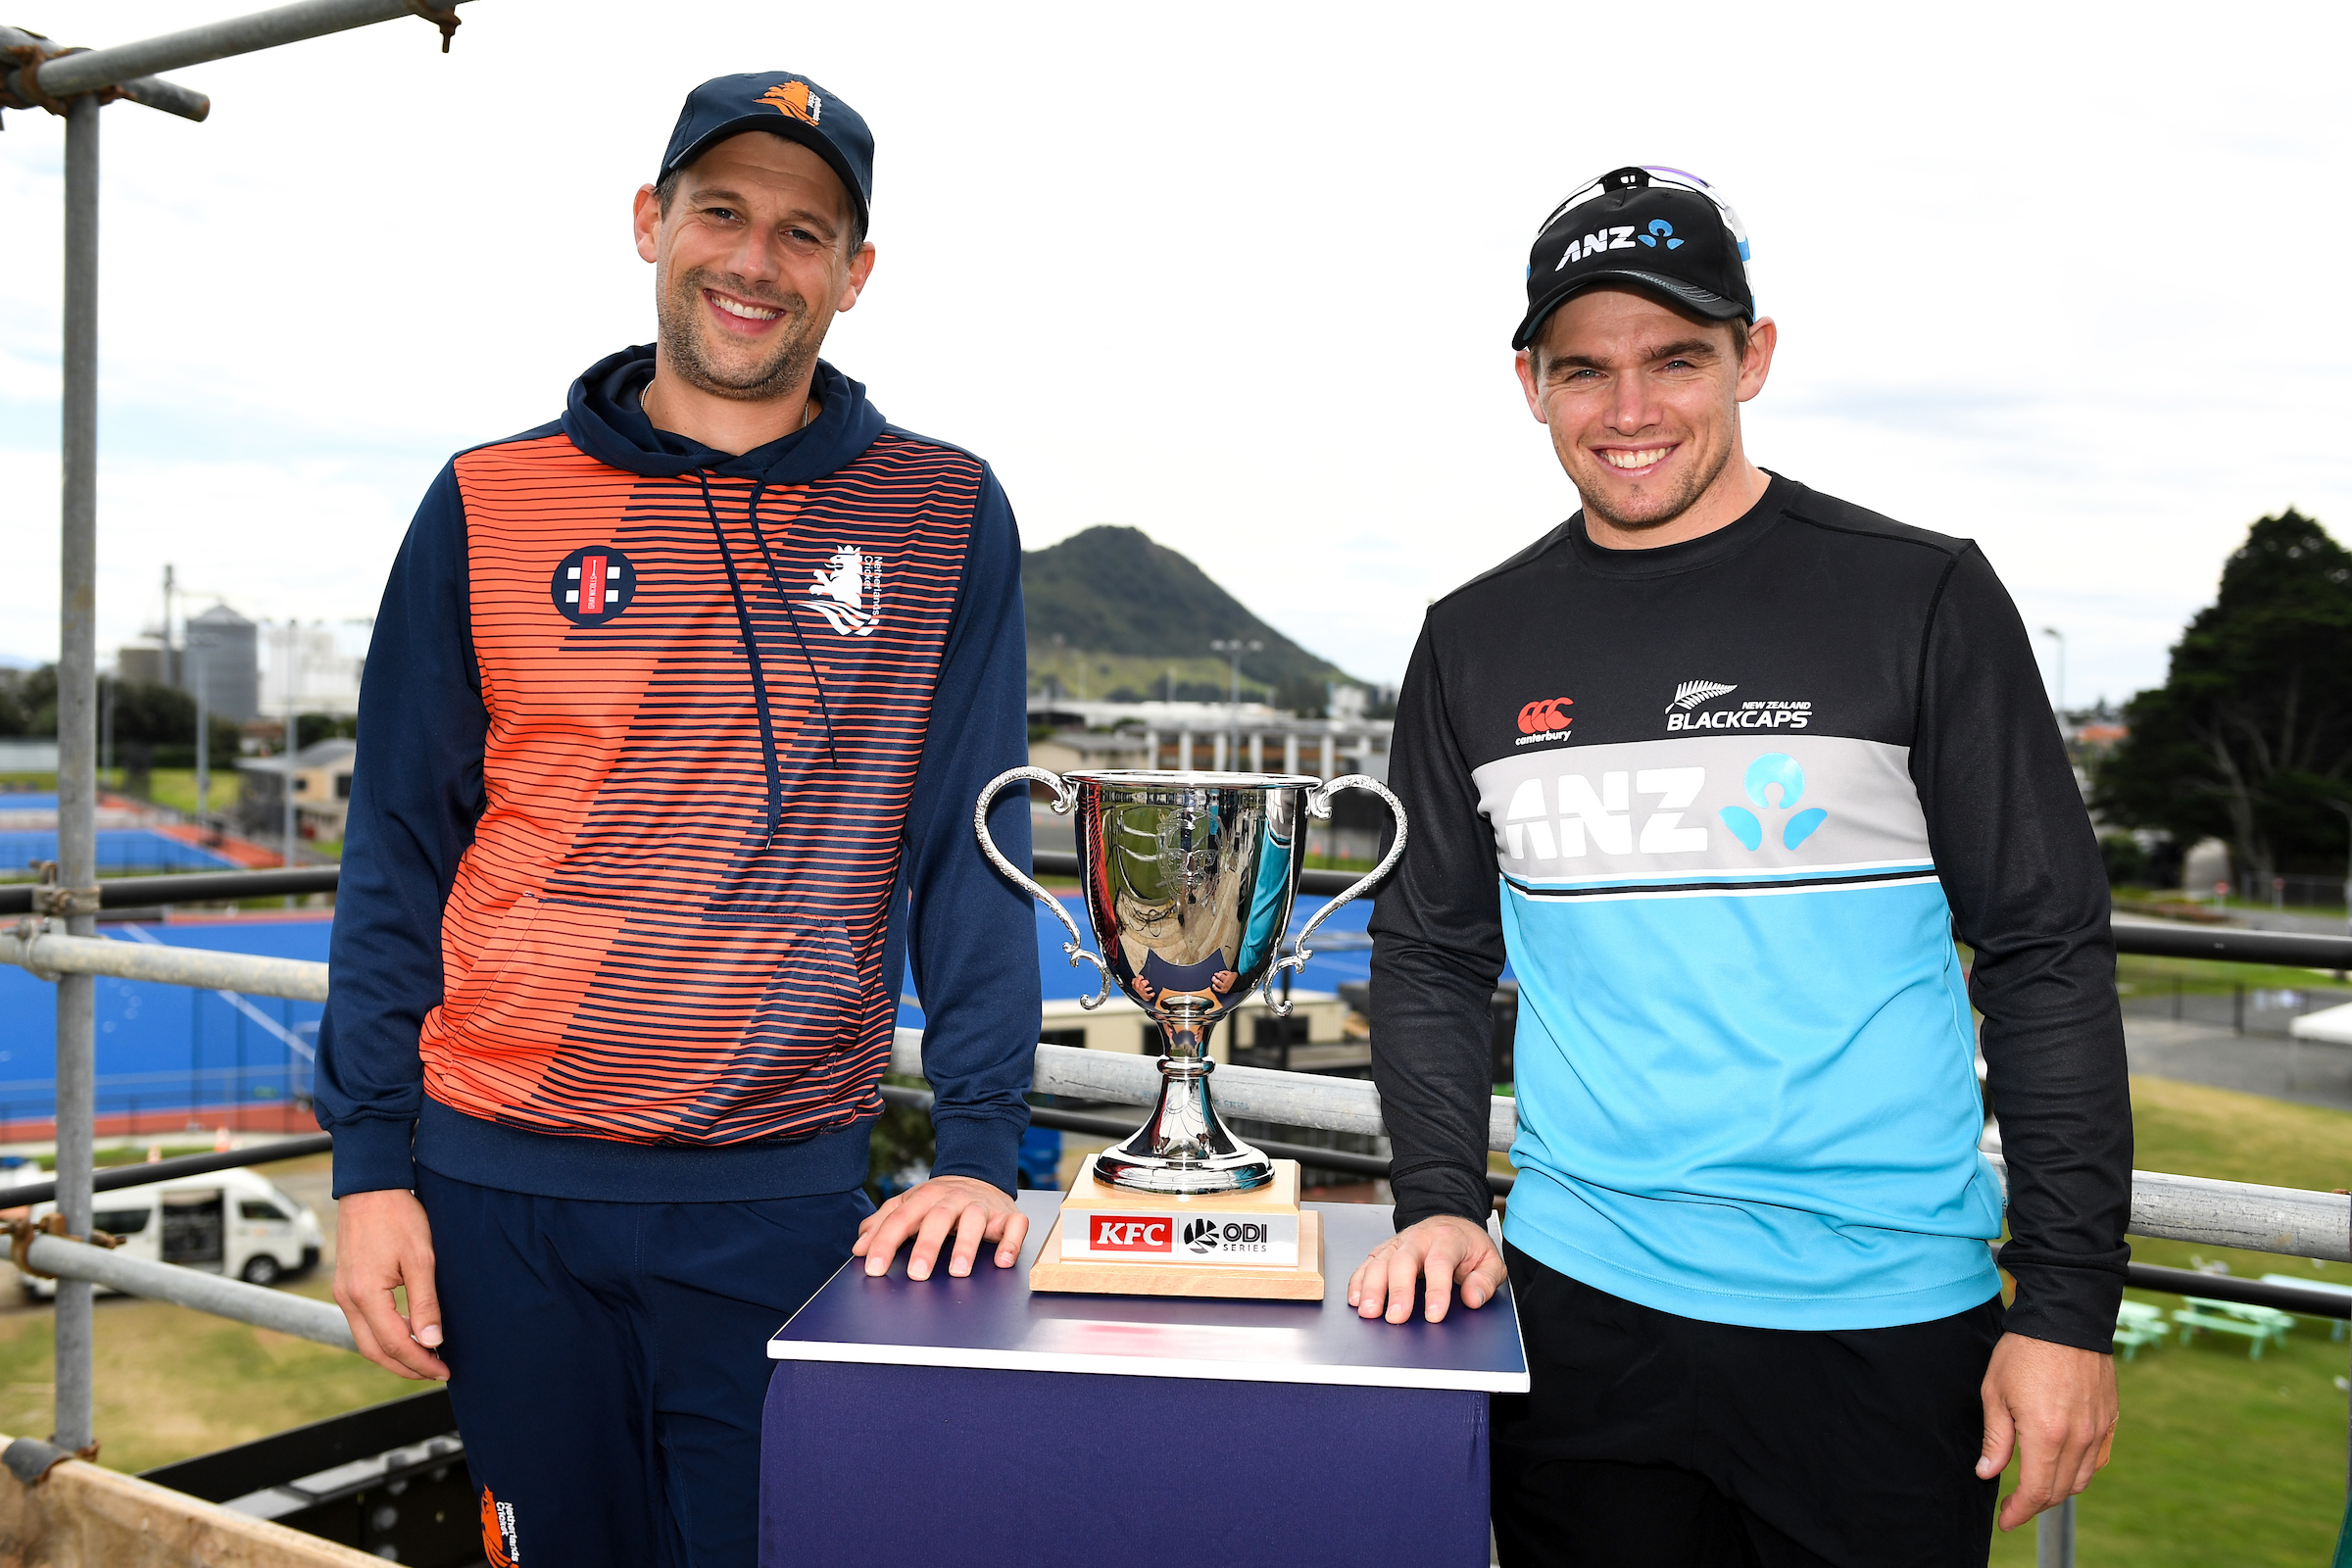 NZ vs NED Live Score: Depleted New Zealand take on Netherlands as Ross Taylor swansong begins - Follow New Zealand vs Netherlands 1st ODI Live Updates